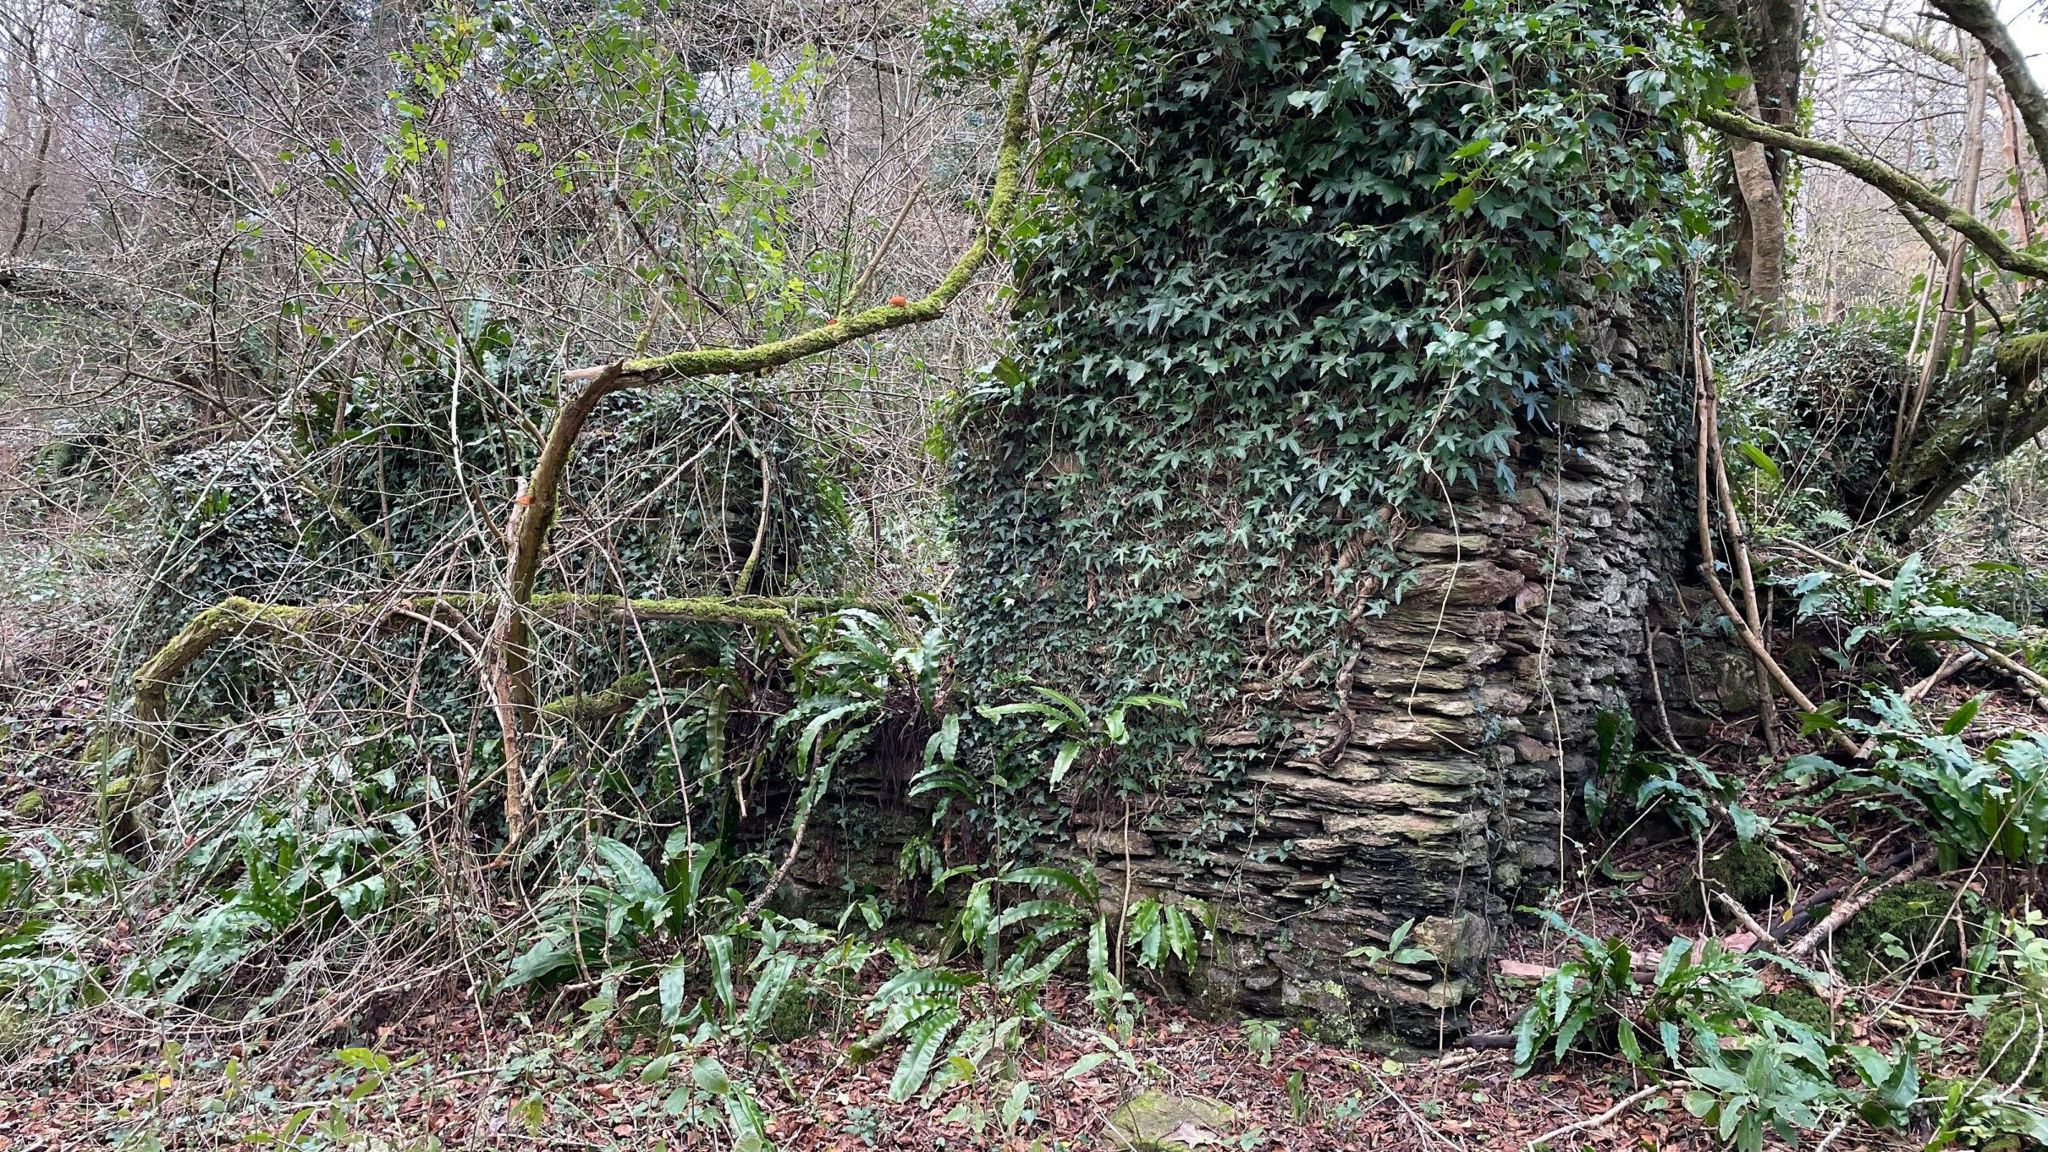 Ruins of an old cottage covered in ivy and trees